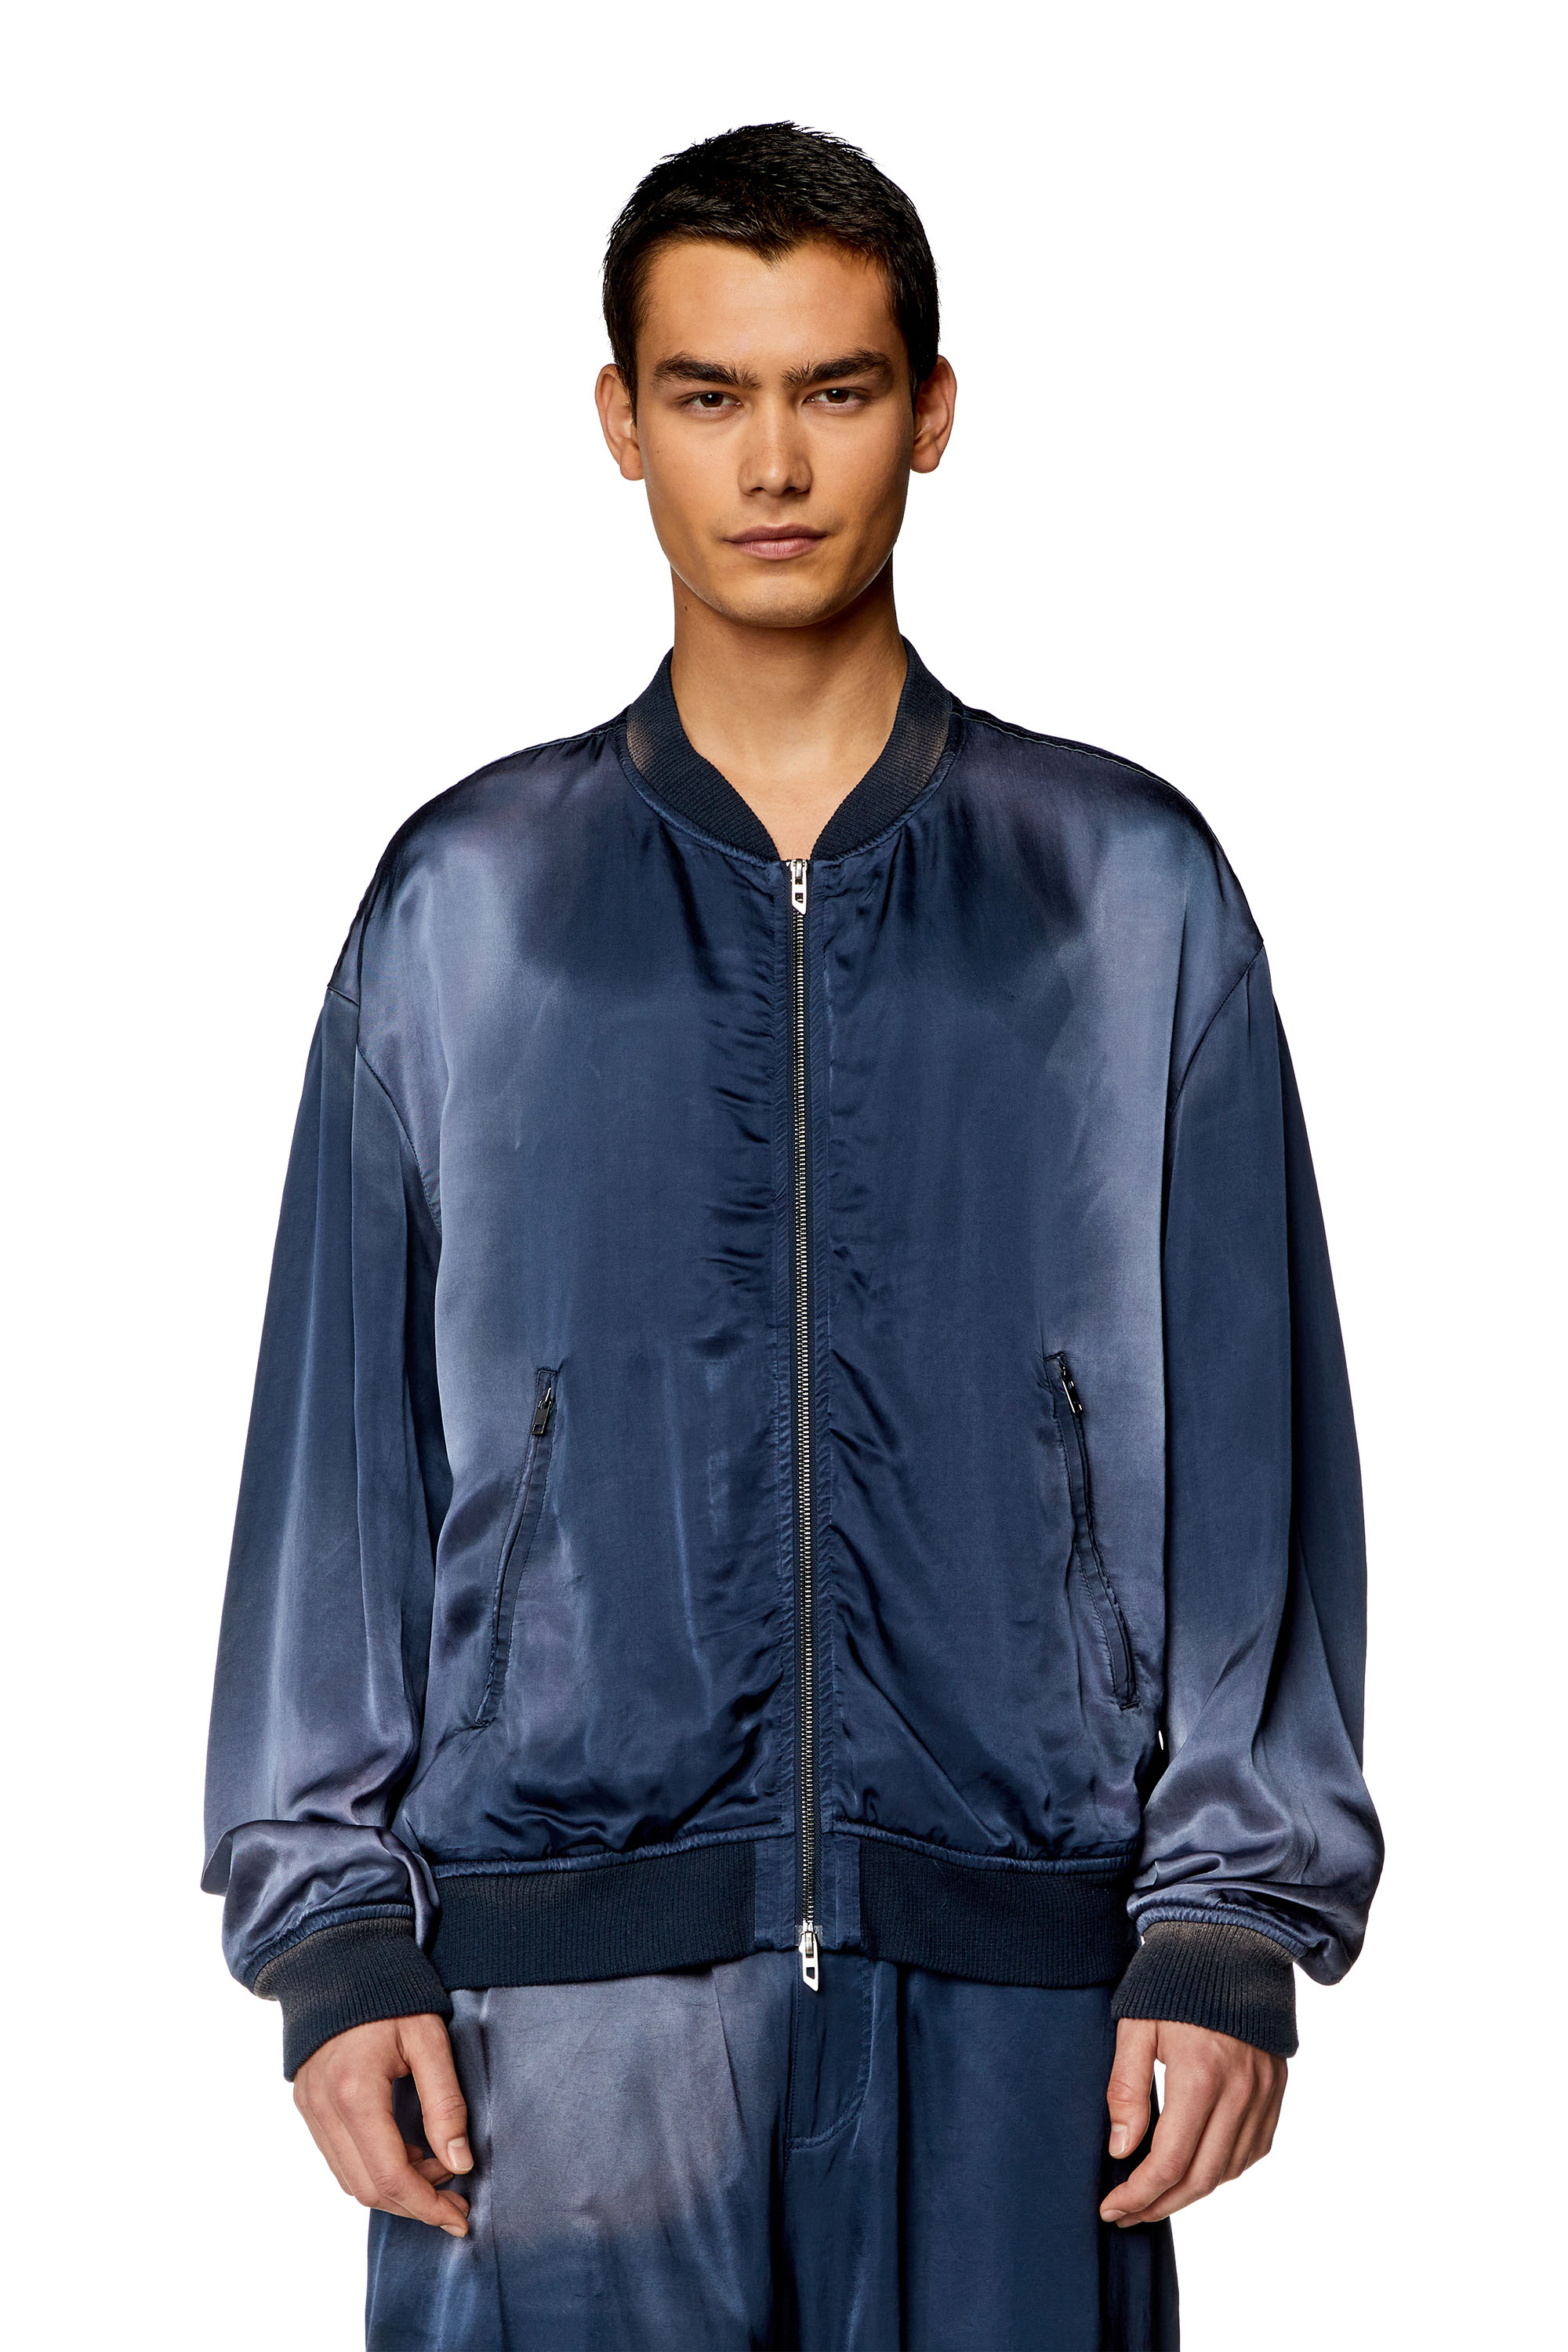 Diesel - J-MARTEX, Man Satin bomber jacket with faded effect in Blue - Image 6